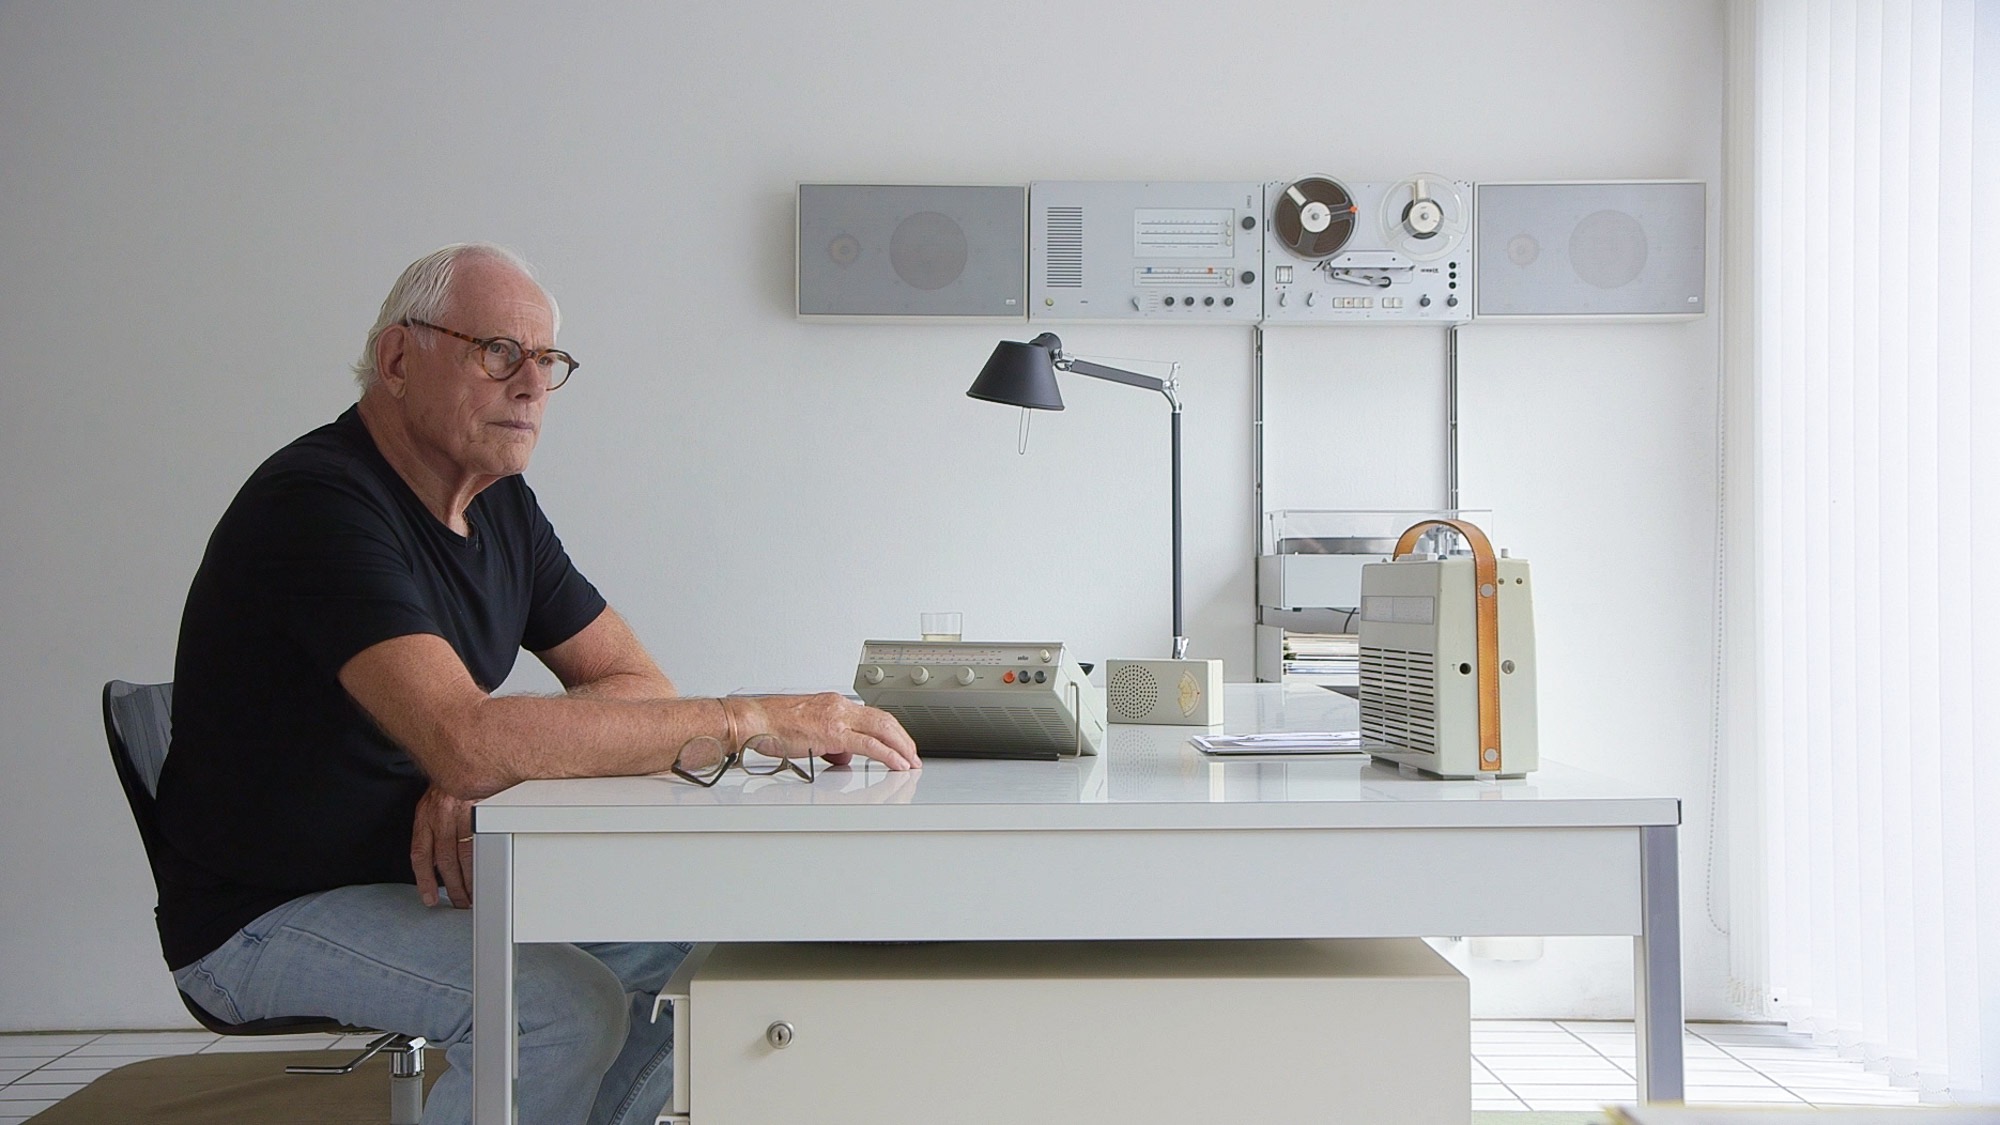 Portrait of Dieter Rams at his desk at home surrounded by some of his designs